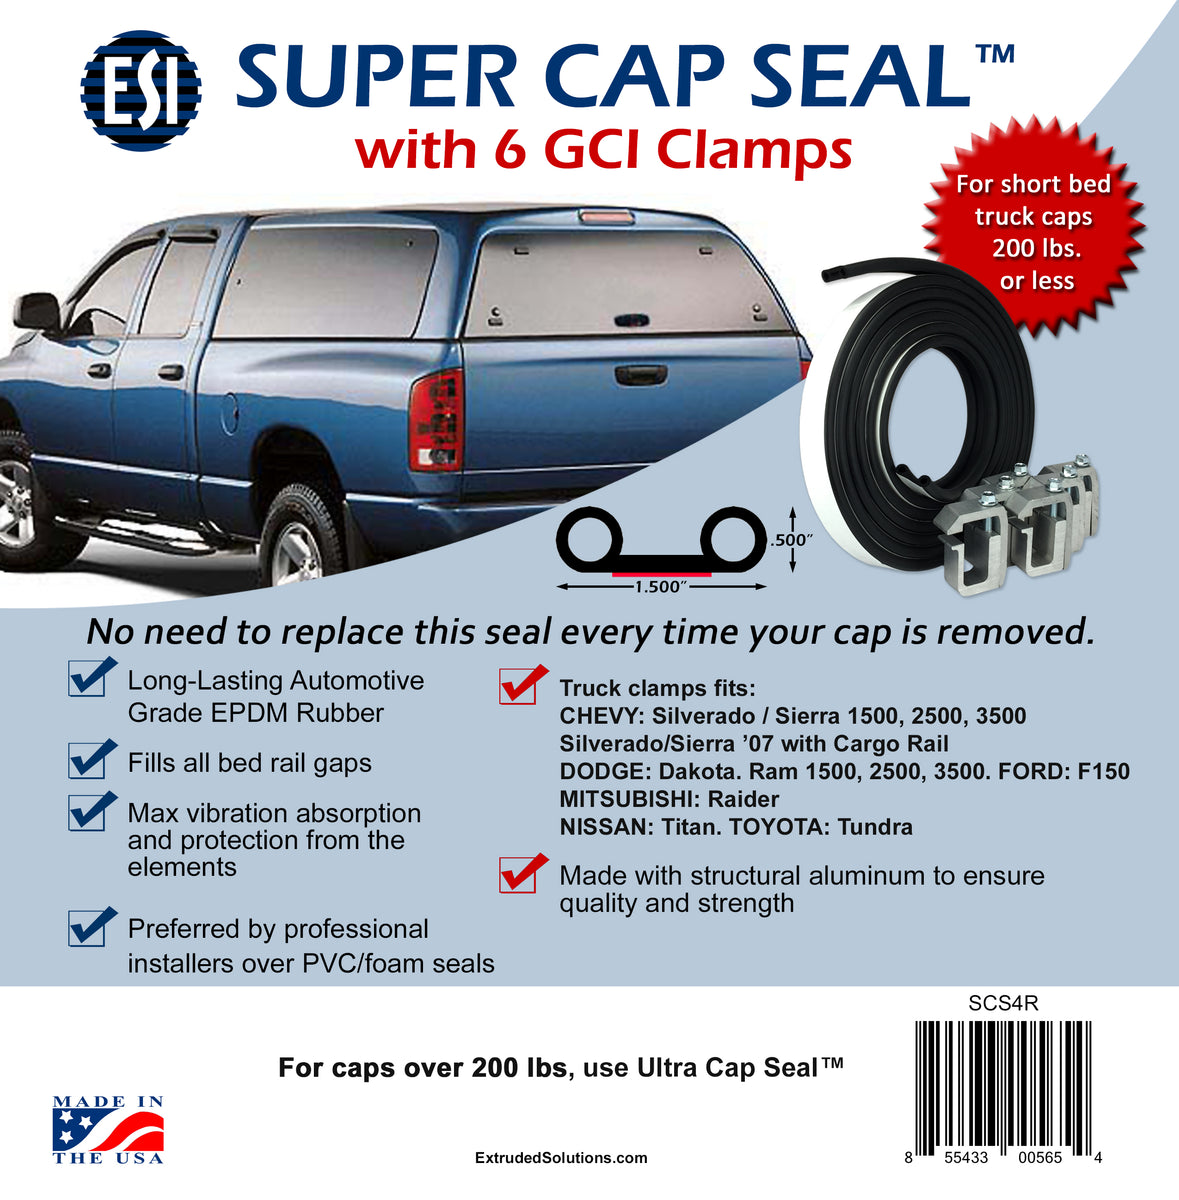 Extruded Solutions ESI Super Cap Seal and 4 G-1 Clamps for Short Bed Pickup 